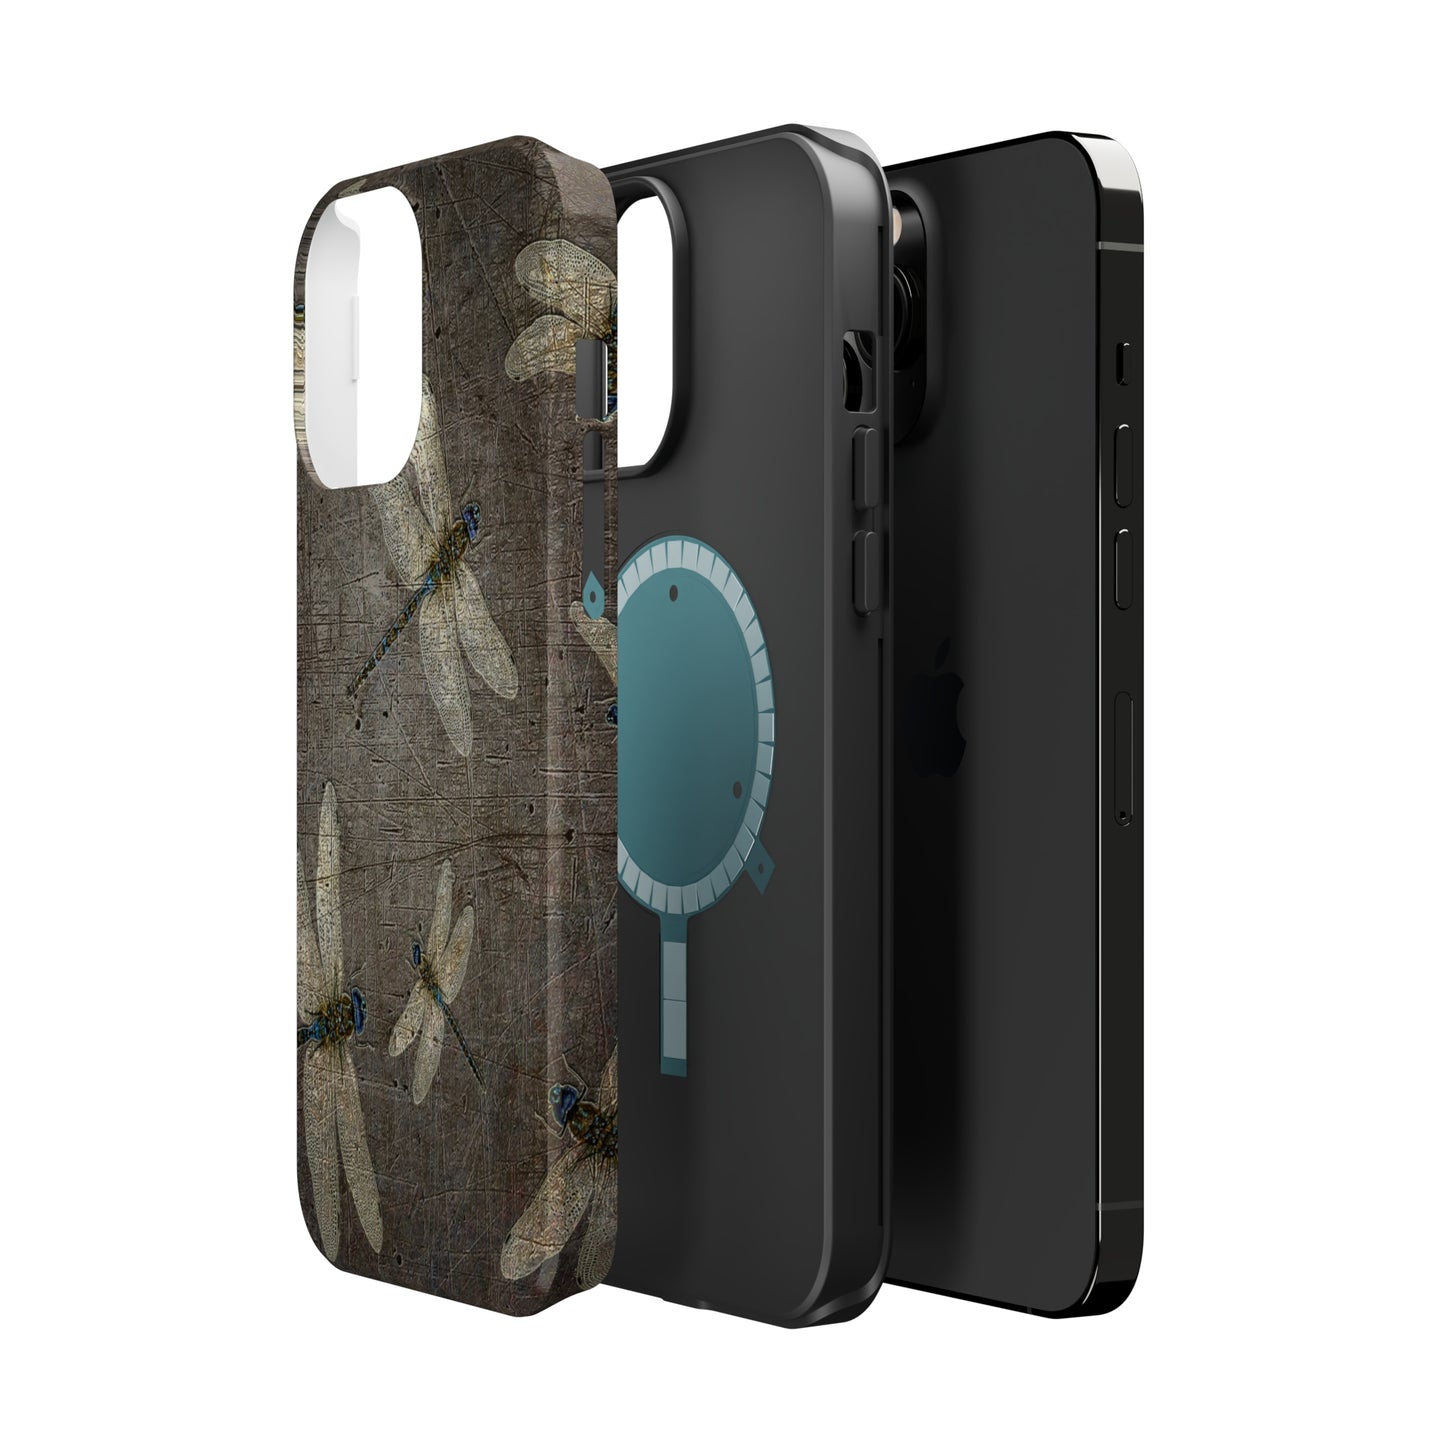 Dragonfly Themed Mag Safe Tough Cases for iPhones 13 and 14 - Flight of Dragonflies on Stone Background Print